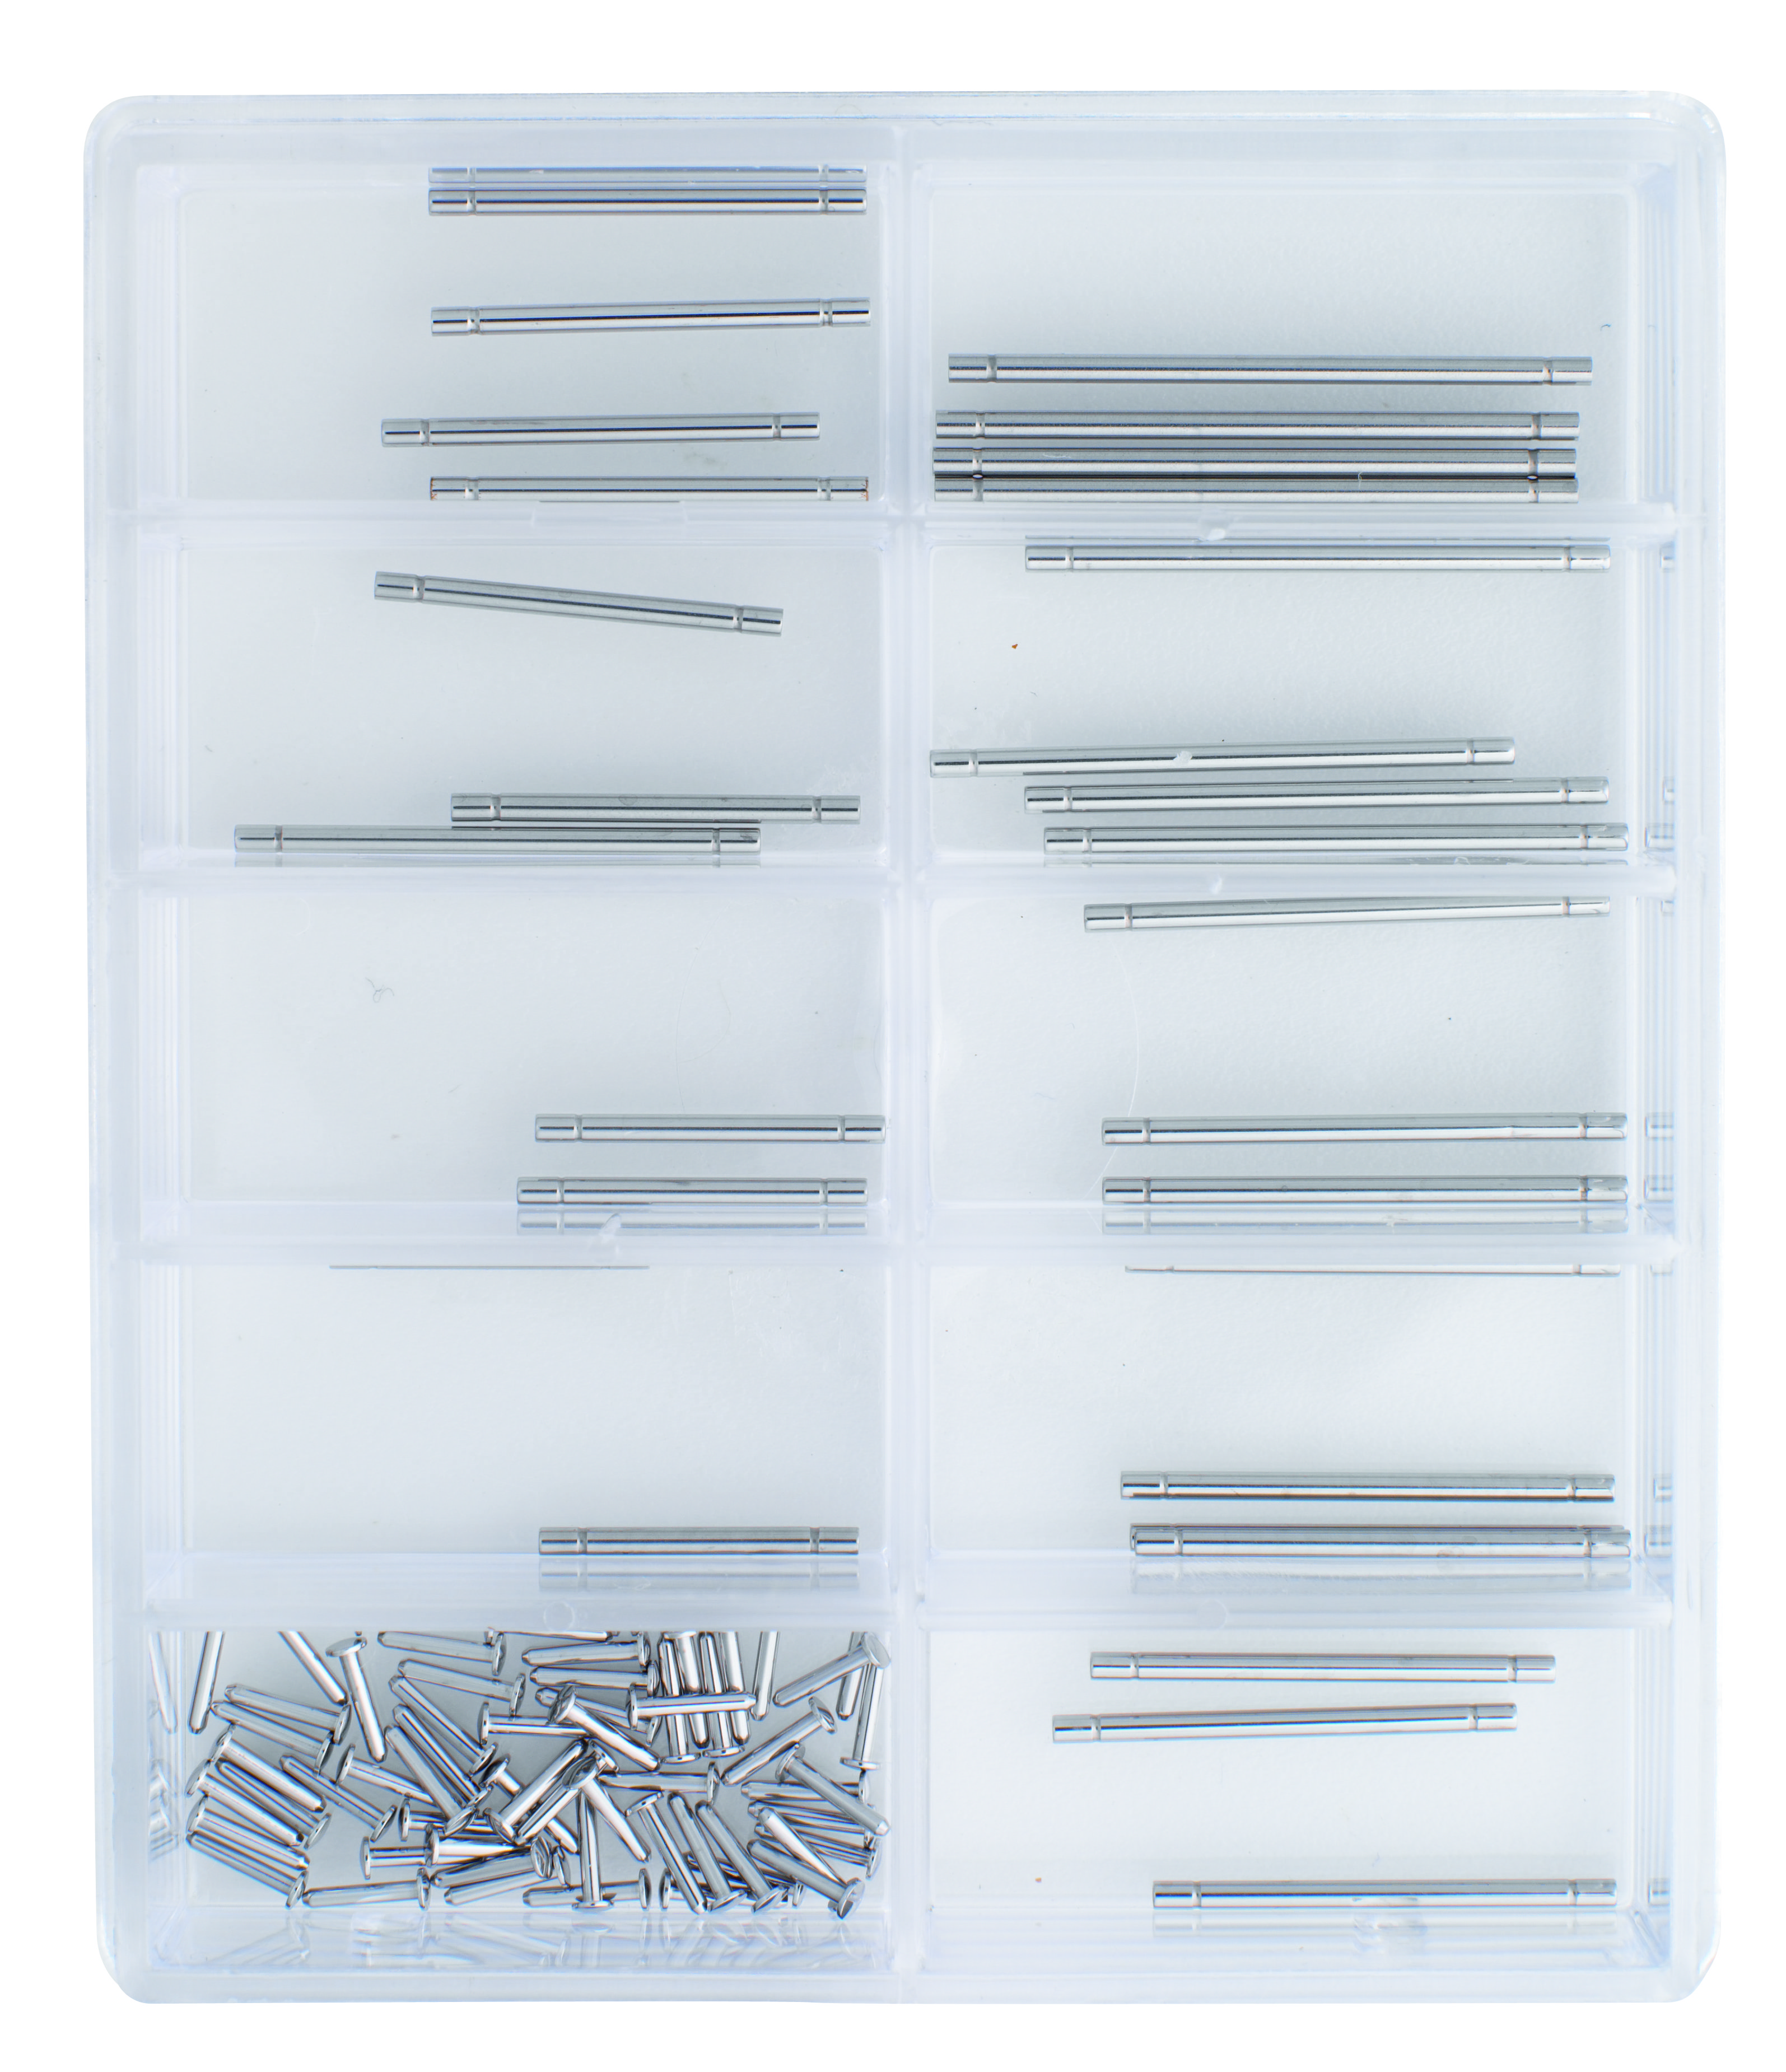 Strap pin assortment, stainless steel, length 11.00-22.00mm, dia. 1.00mm, contents 30 pcs., for riveting